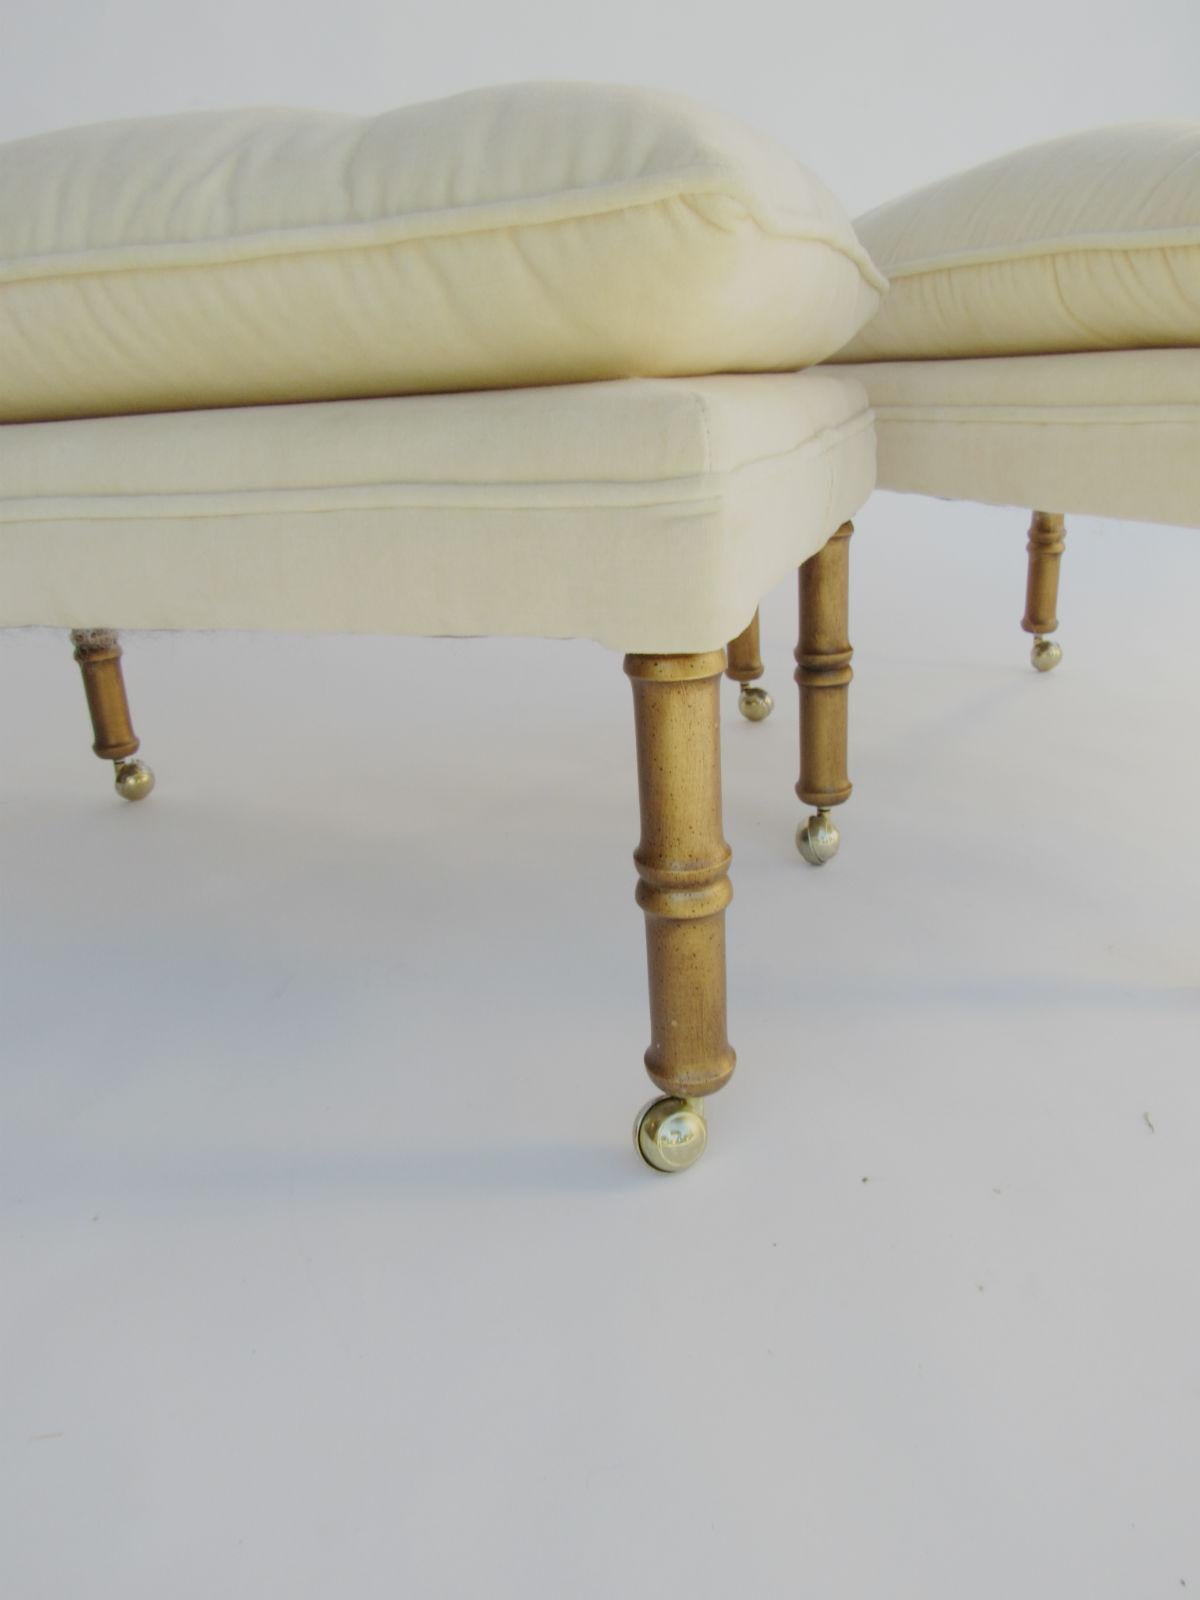 Upholstery Pair of Gilded Mid-Century Modern Faux Bamboo Benches or Stools, 1970s